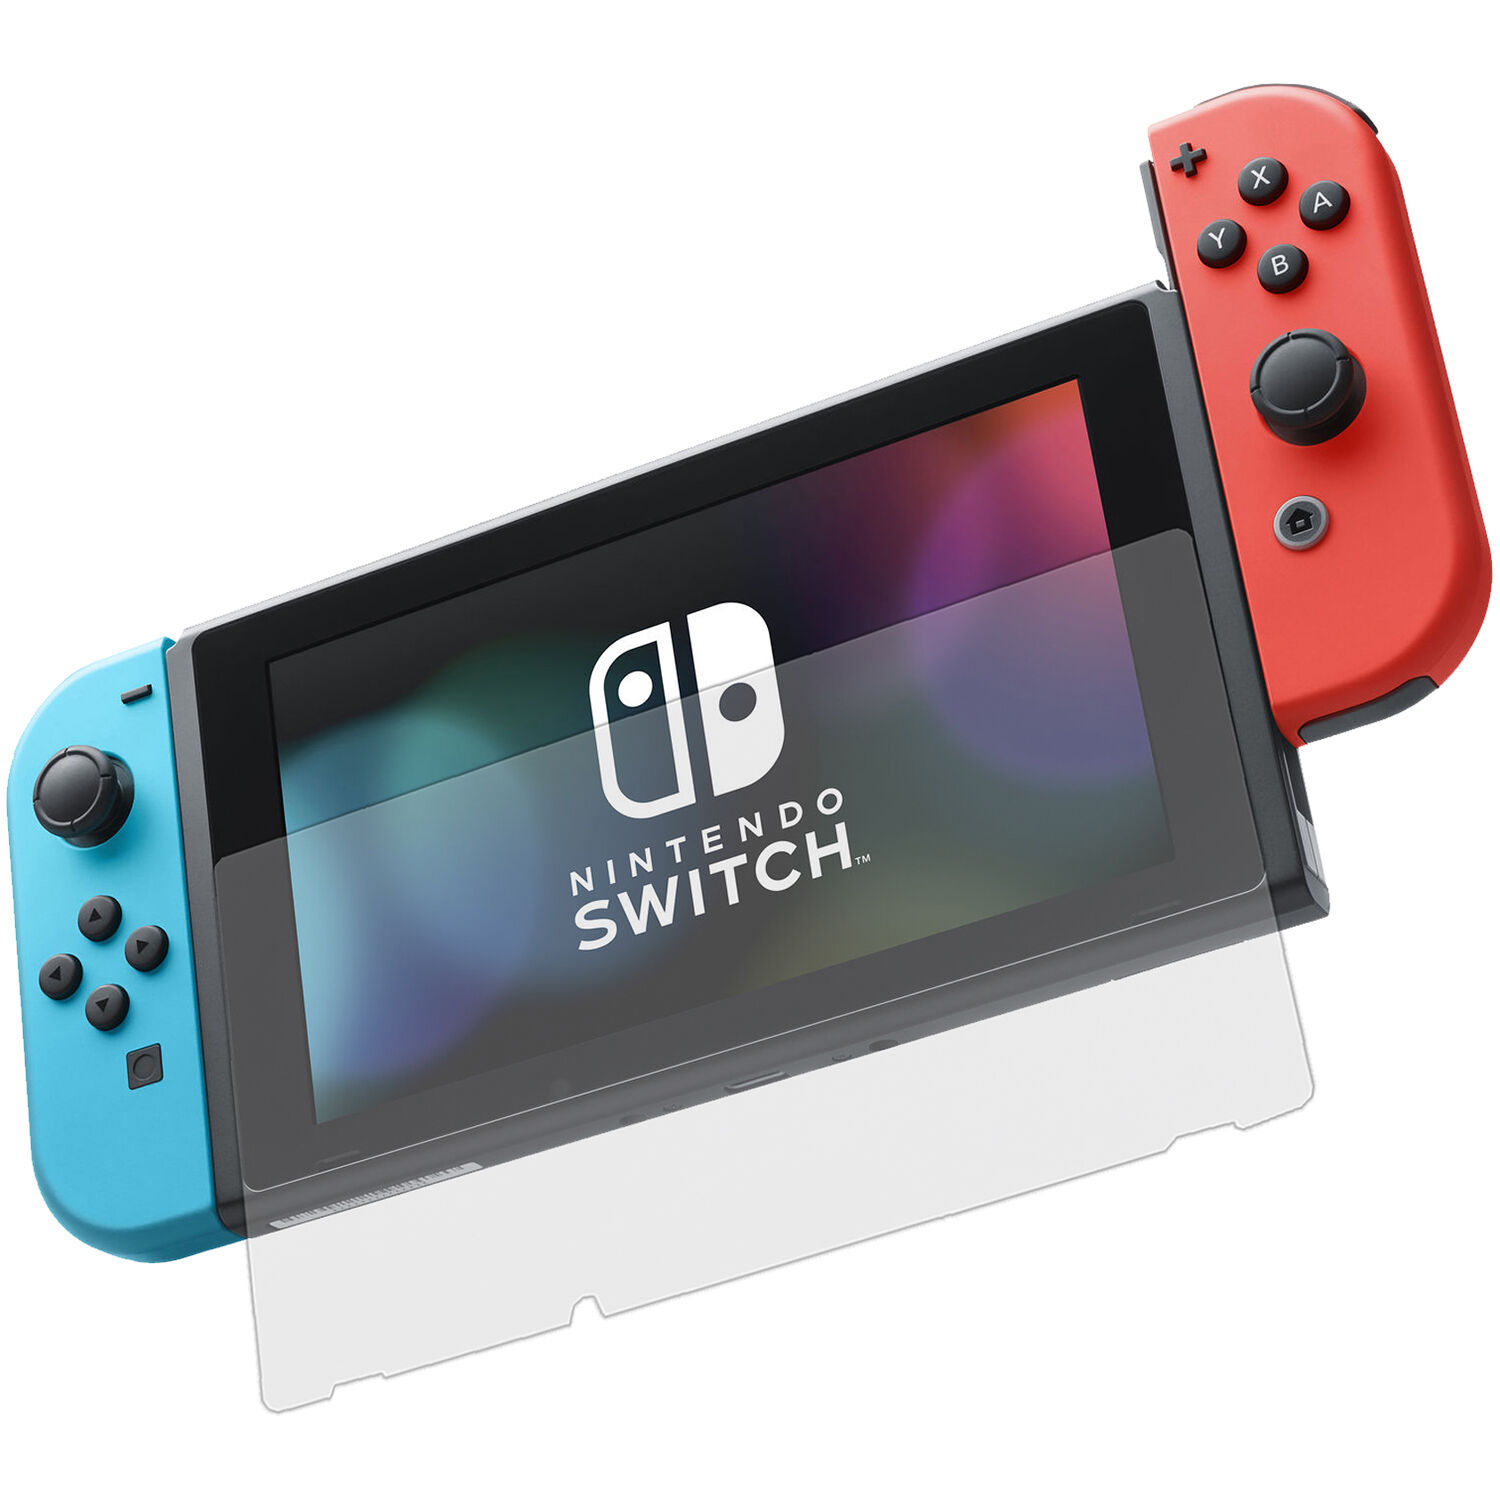 tempered glass screen protector nintendo switch